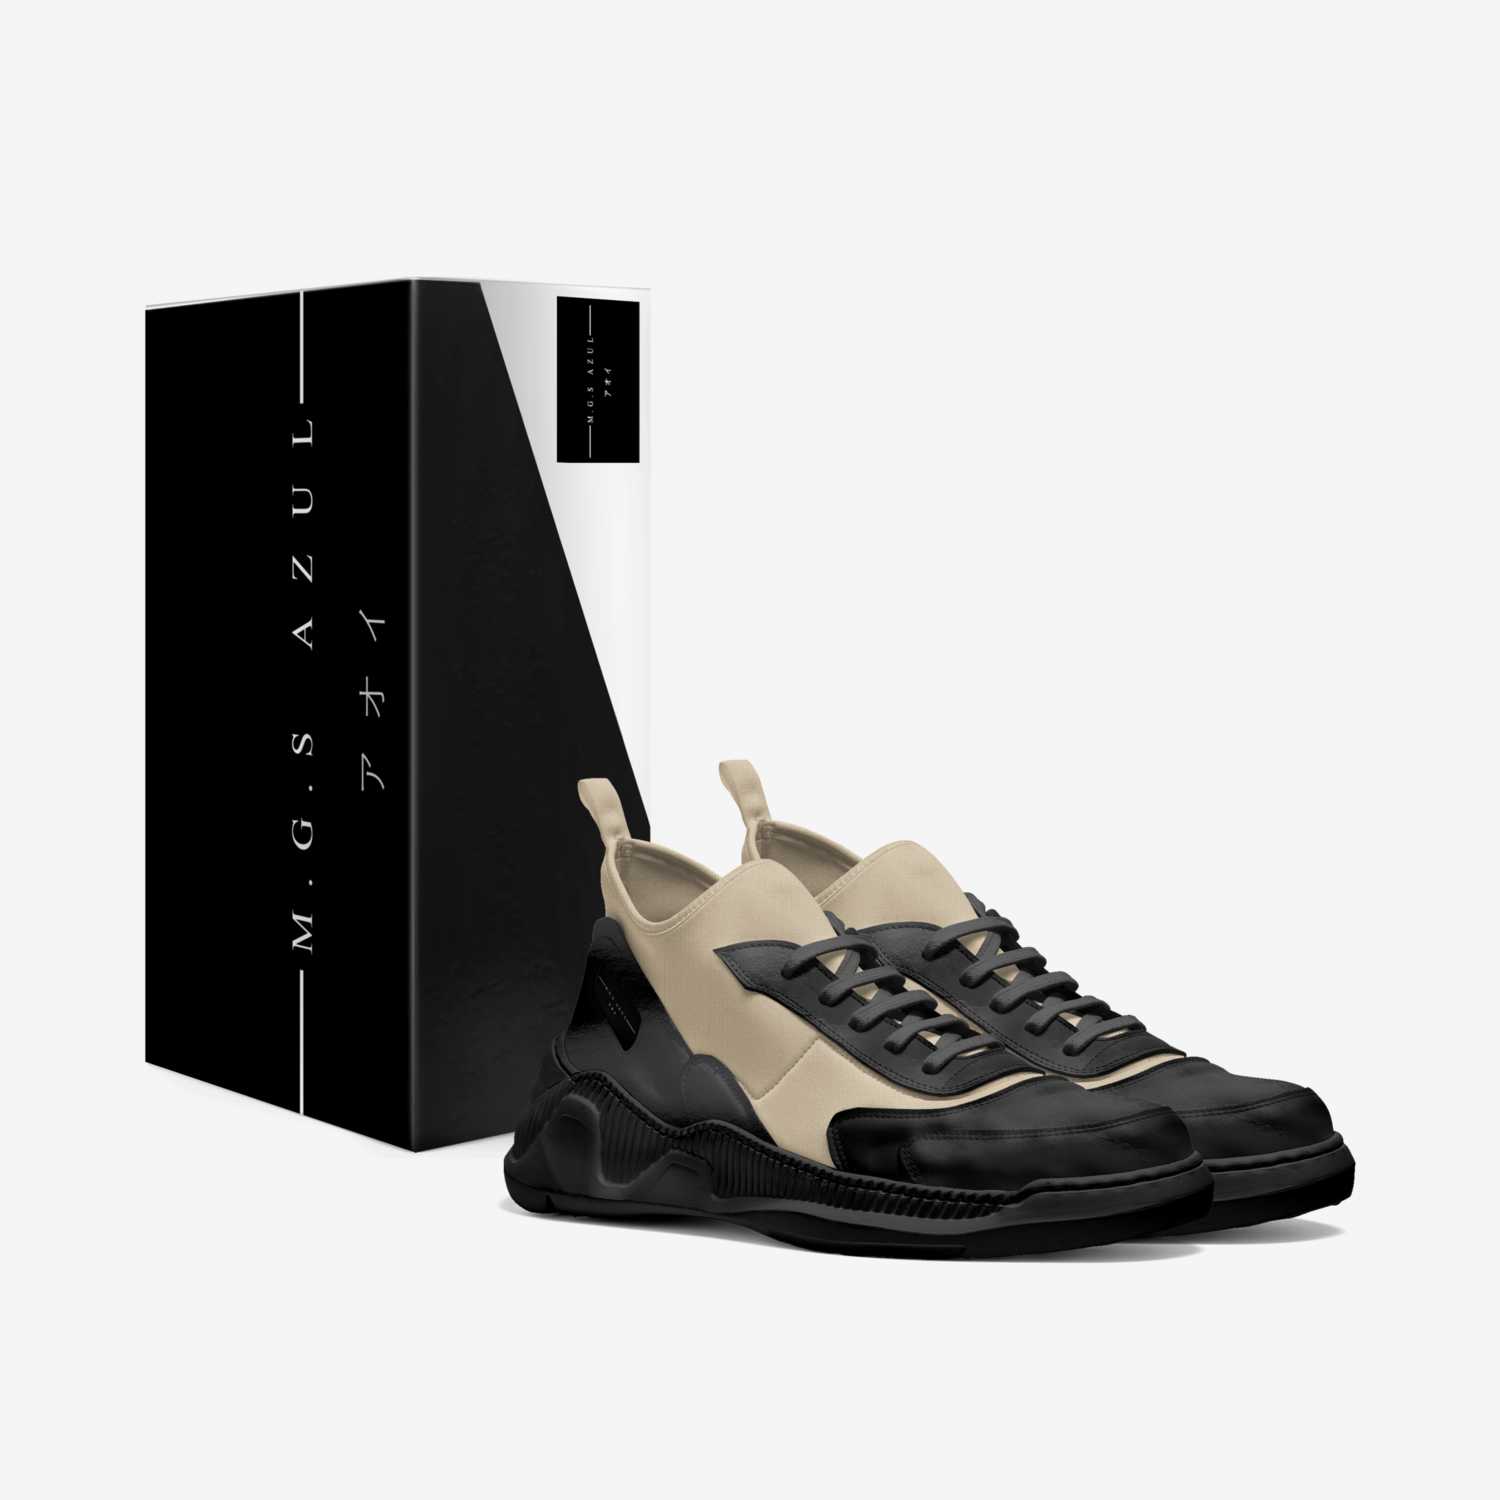 Black Yoru custom made in Italy shoes by Miguel Gomes | Box view